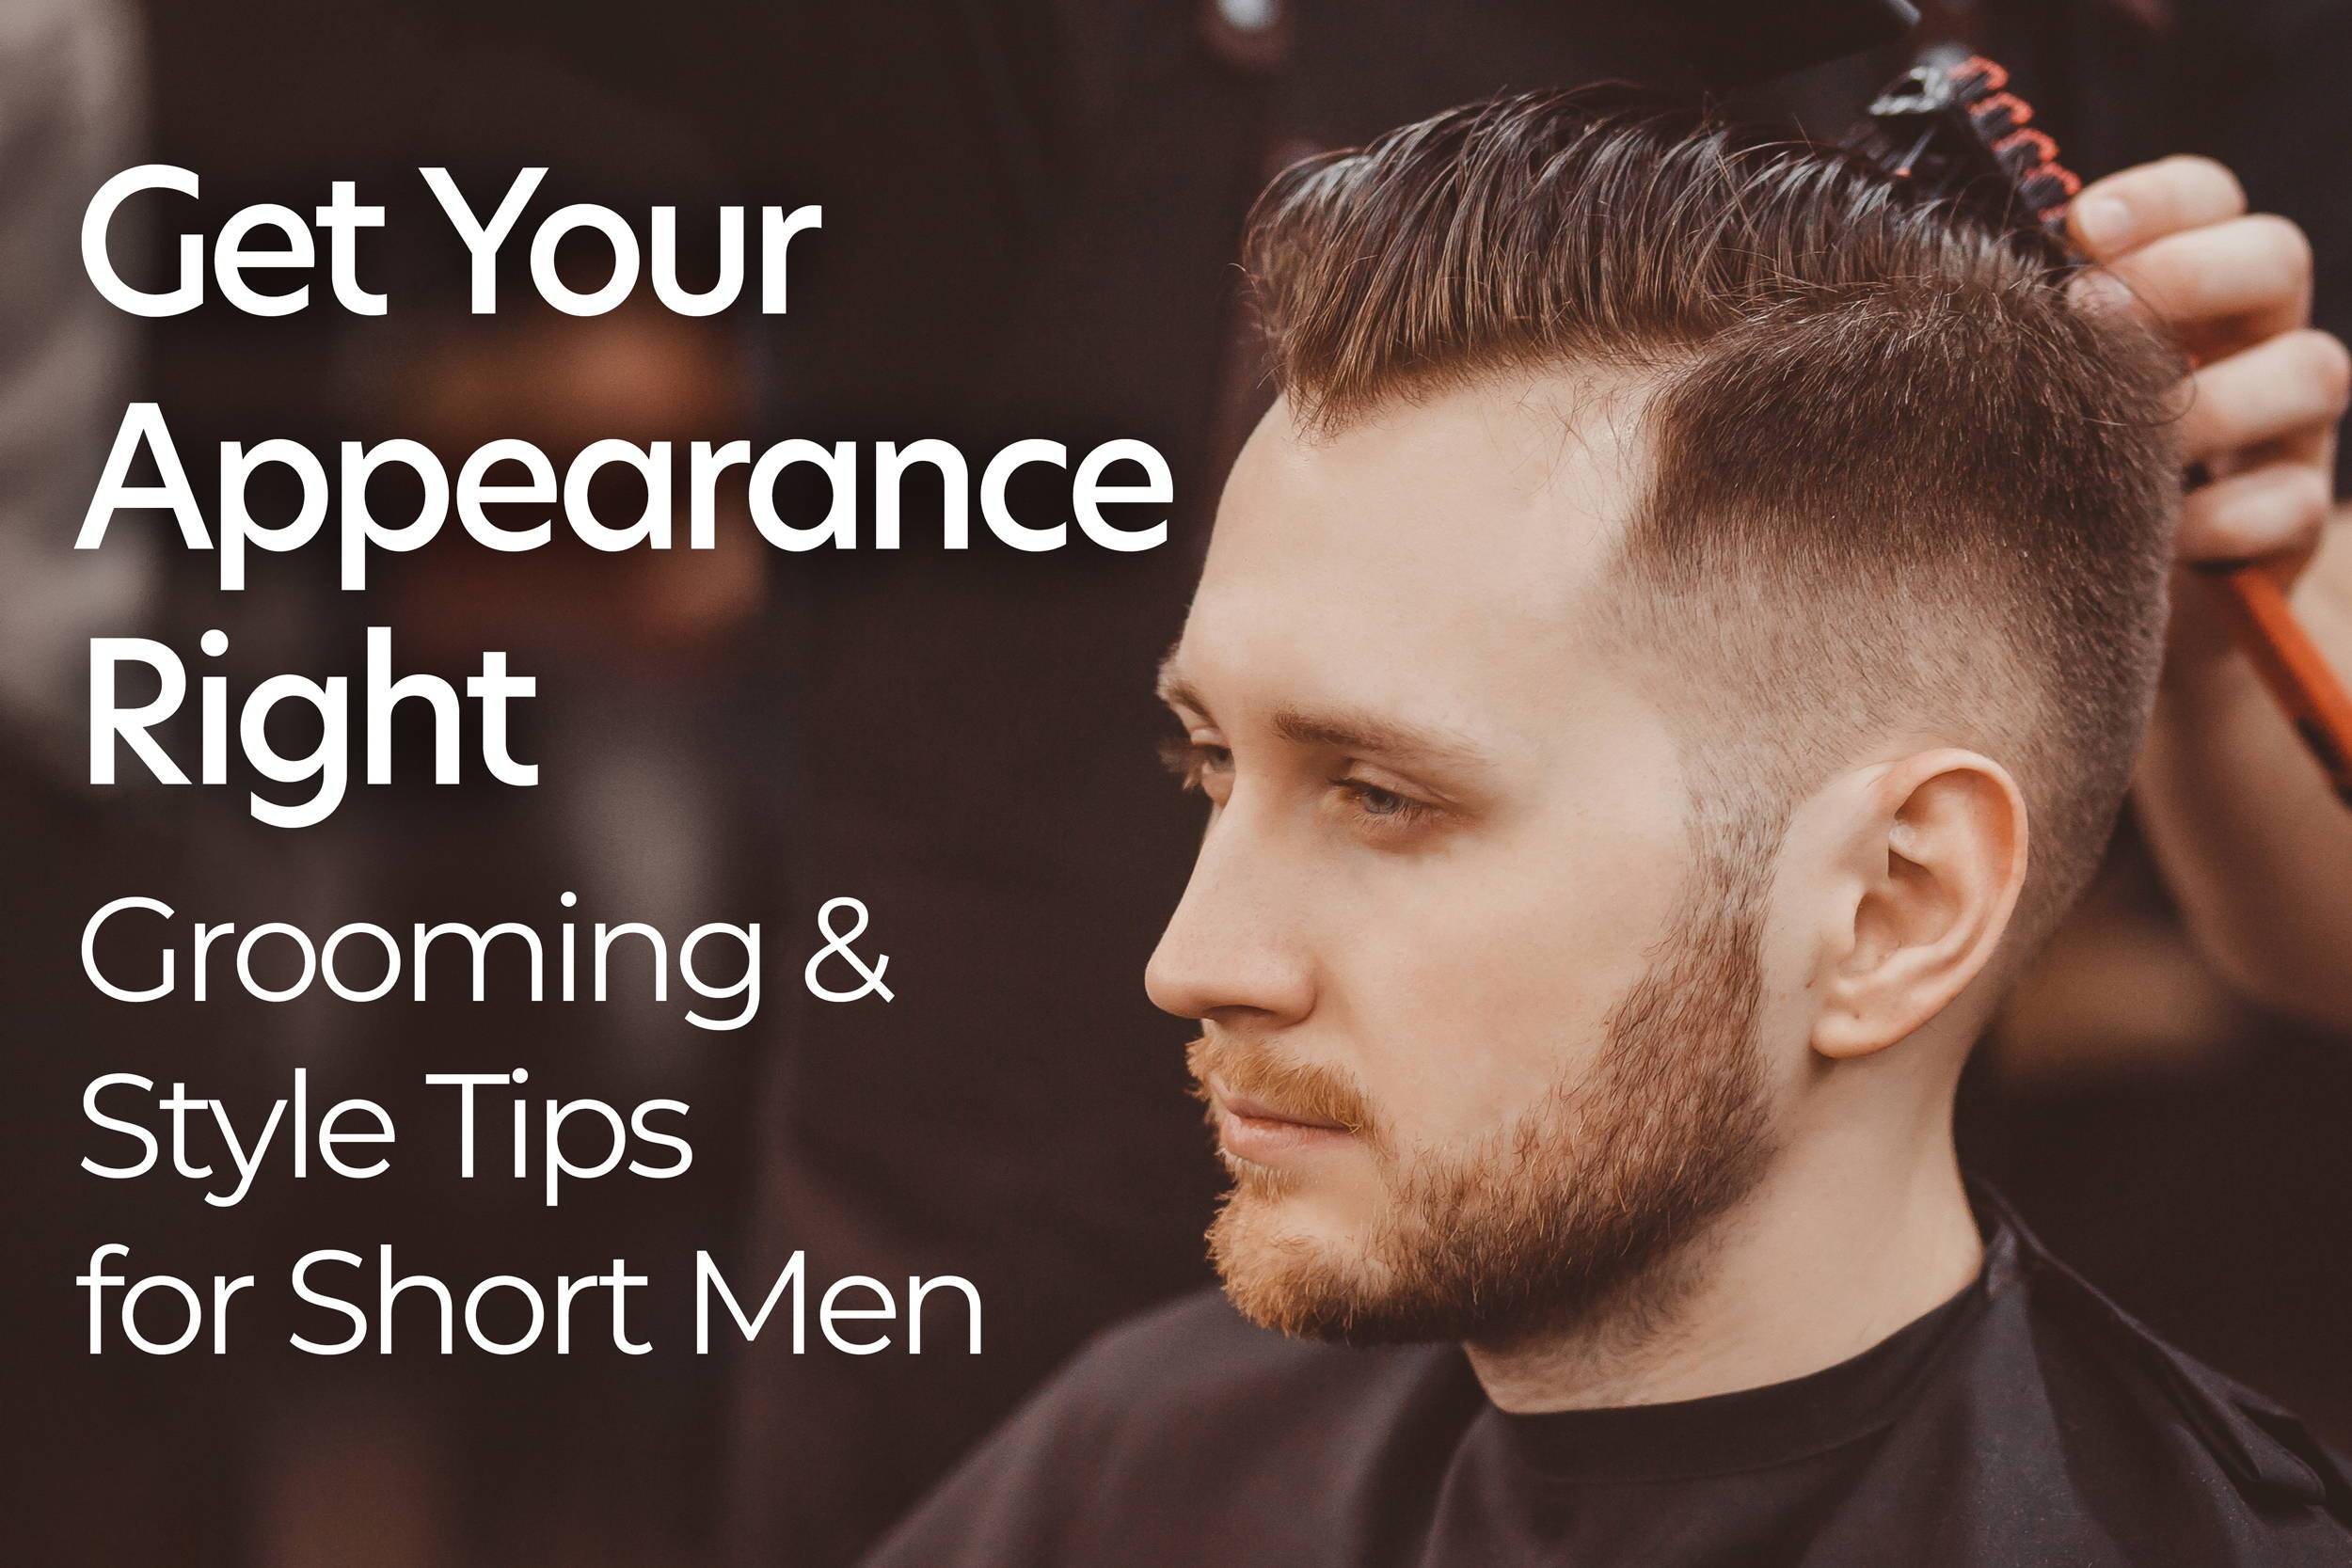 5 Tips for Short Guys to Improve Your Appearance